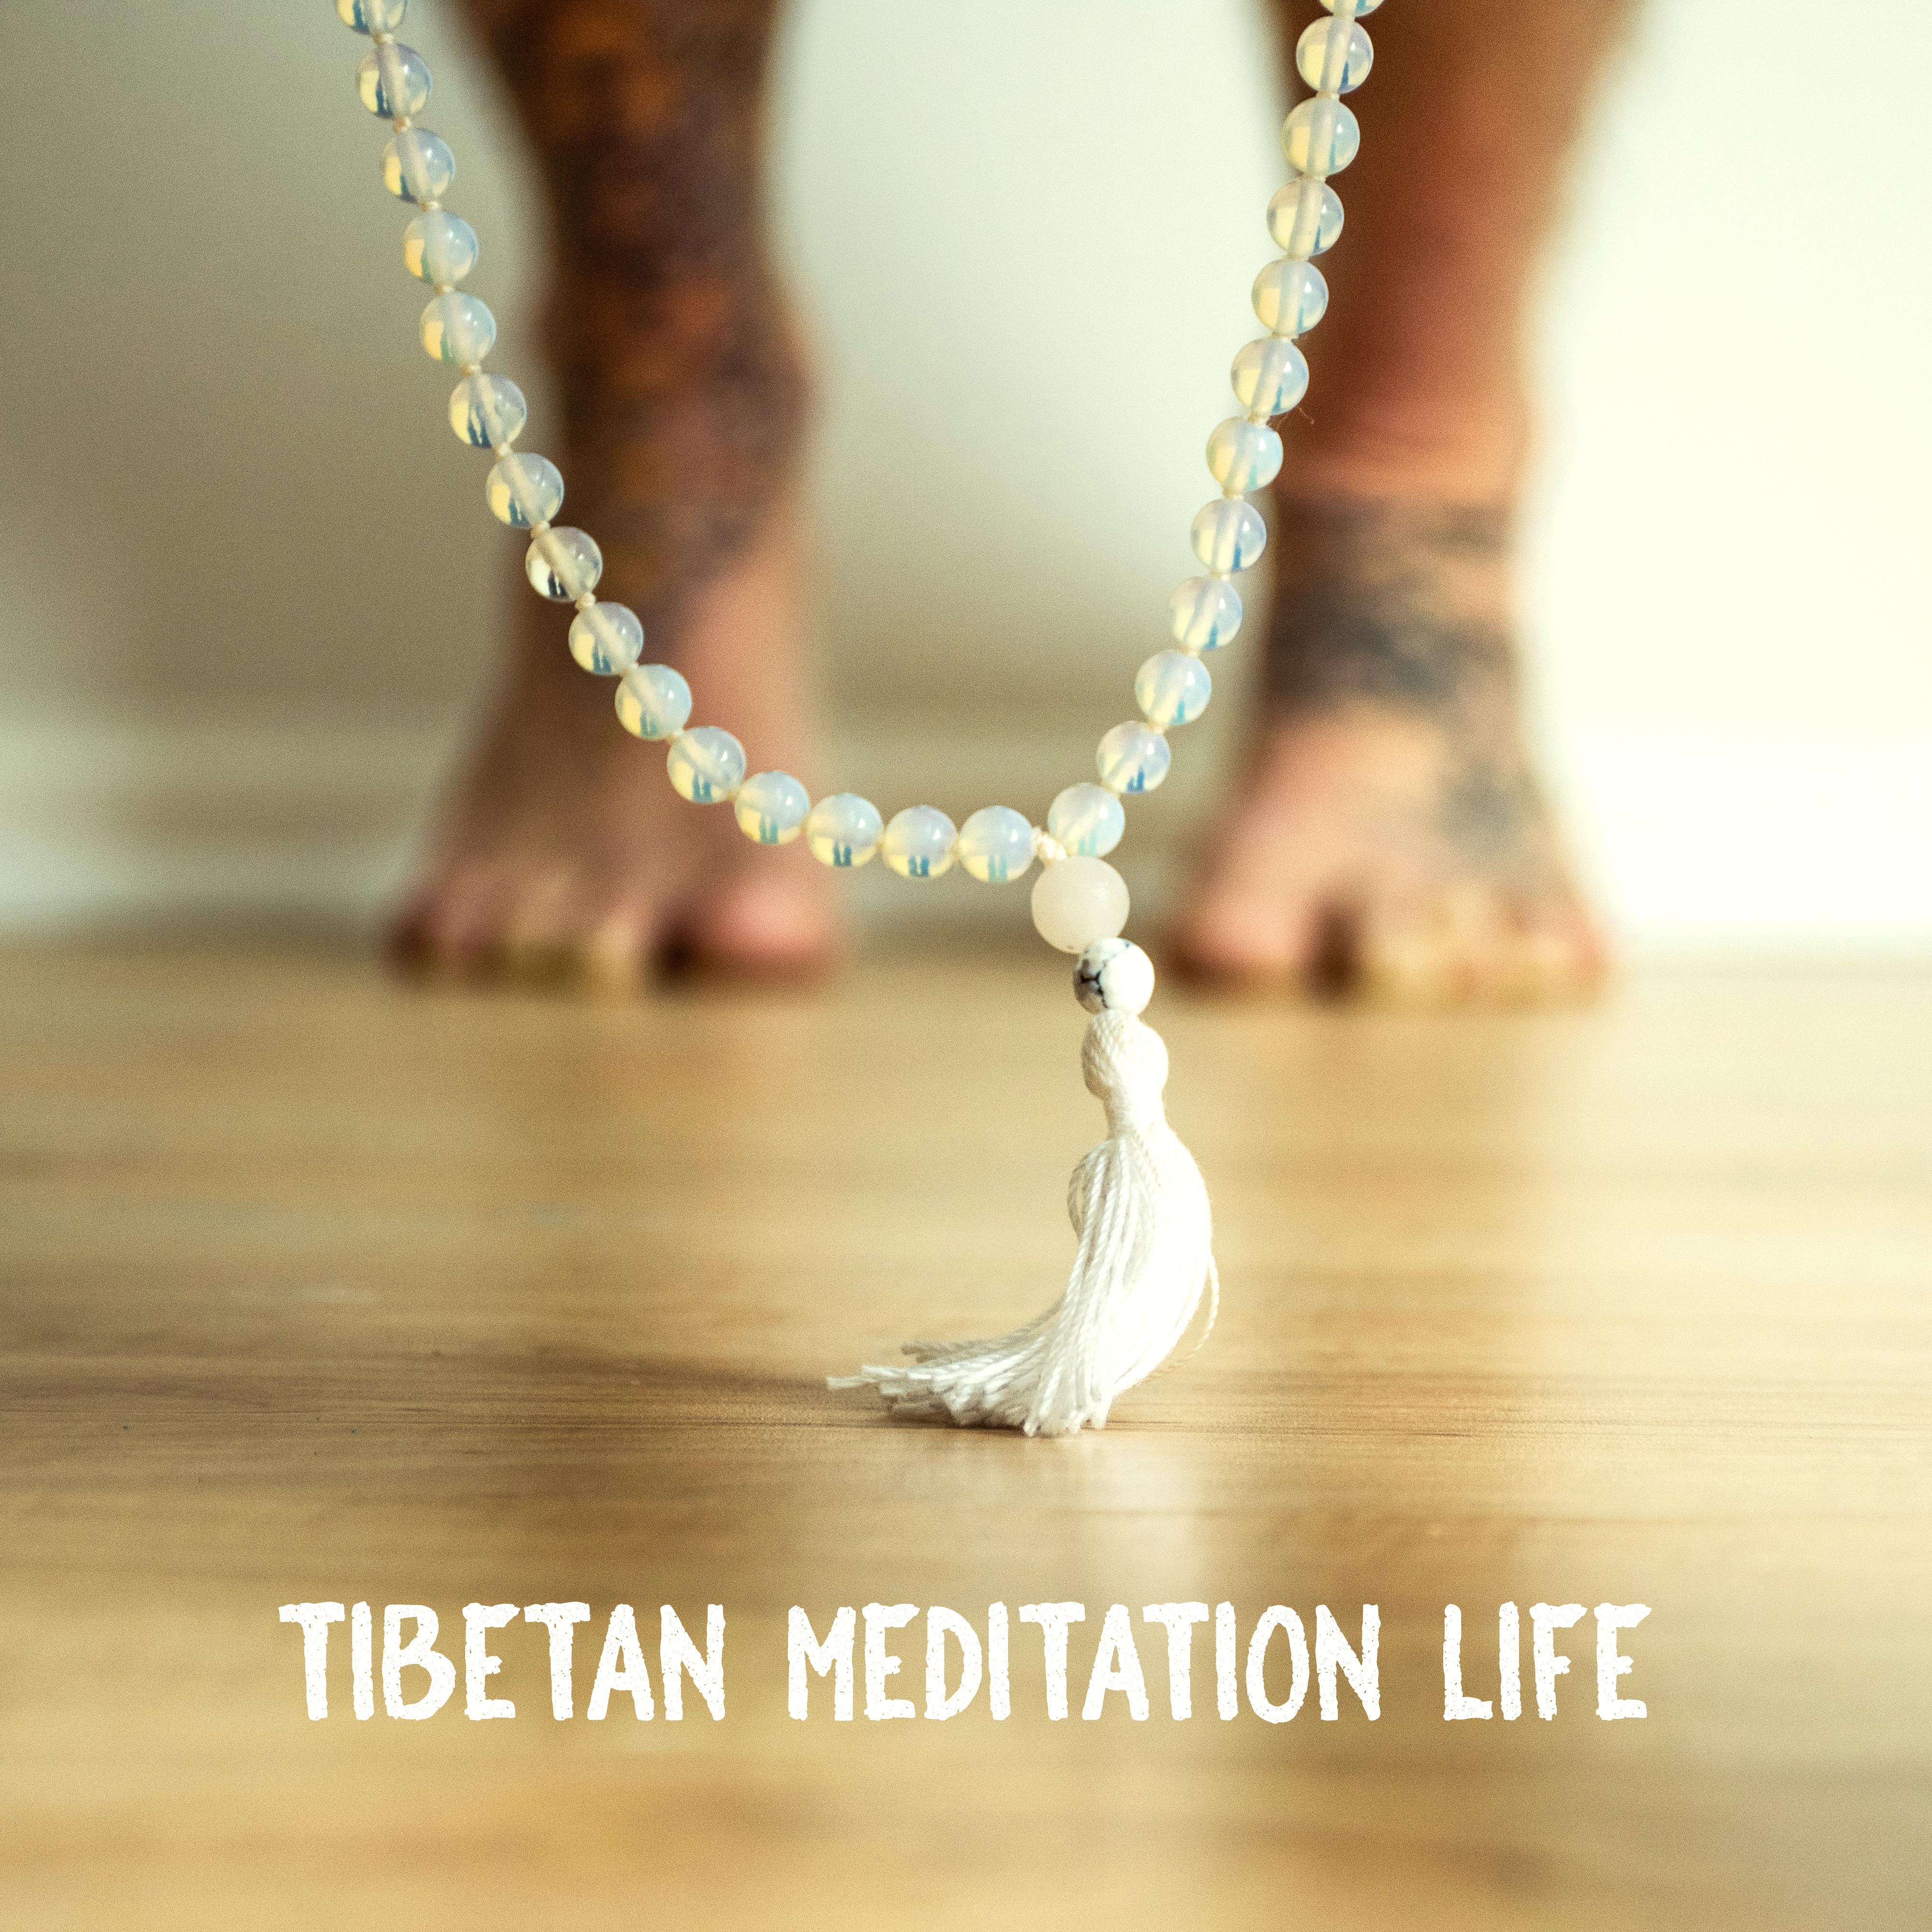 Tibetan Meditation Life: 2019 New Age Music Mix for Deep Yoga & Inner Relaxation, Soul Contemplation, Third Eye Opening, Zen, Mantra Songs